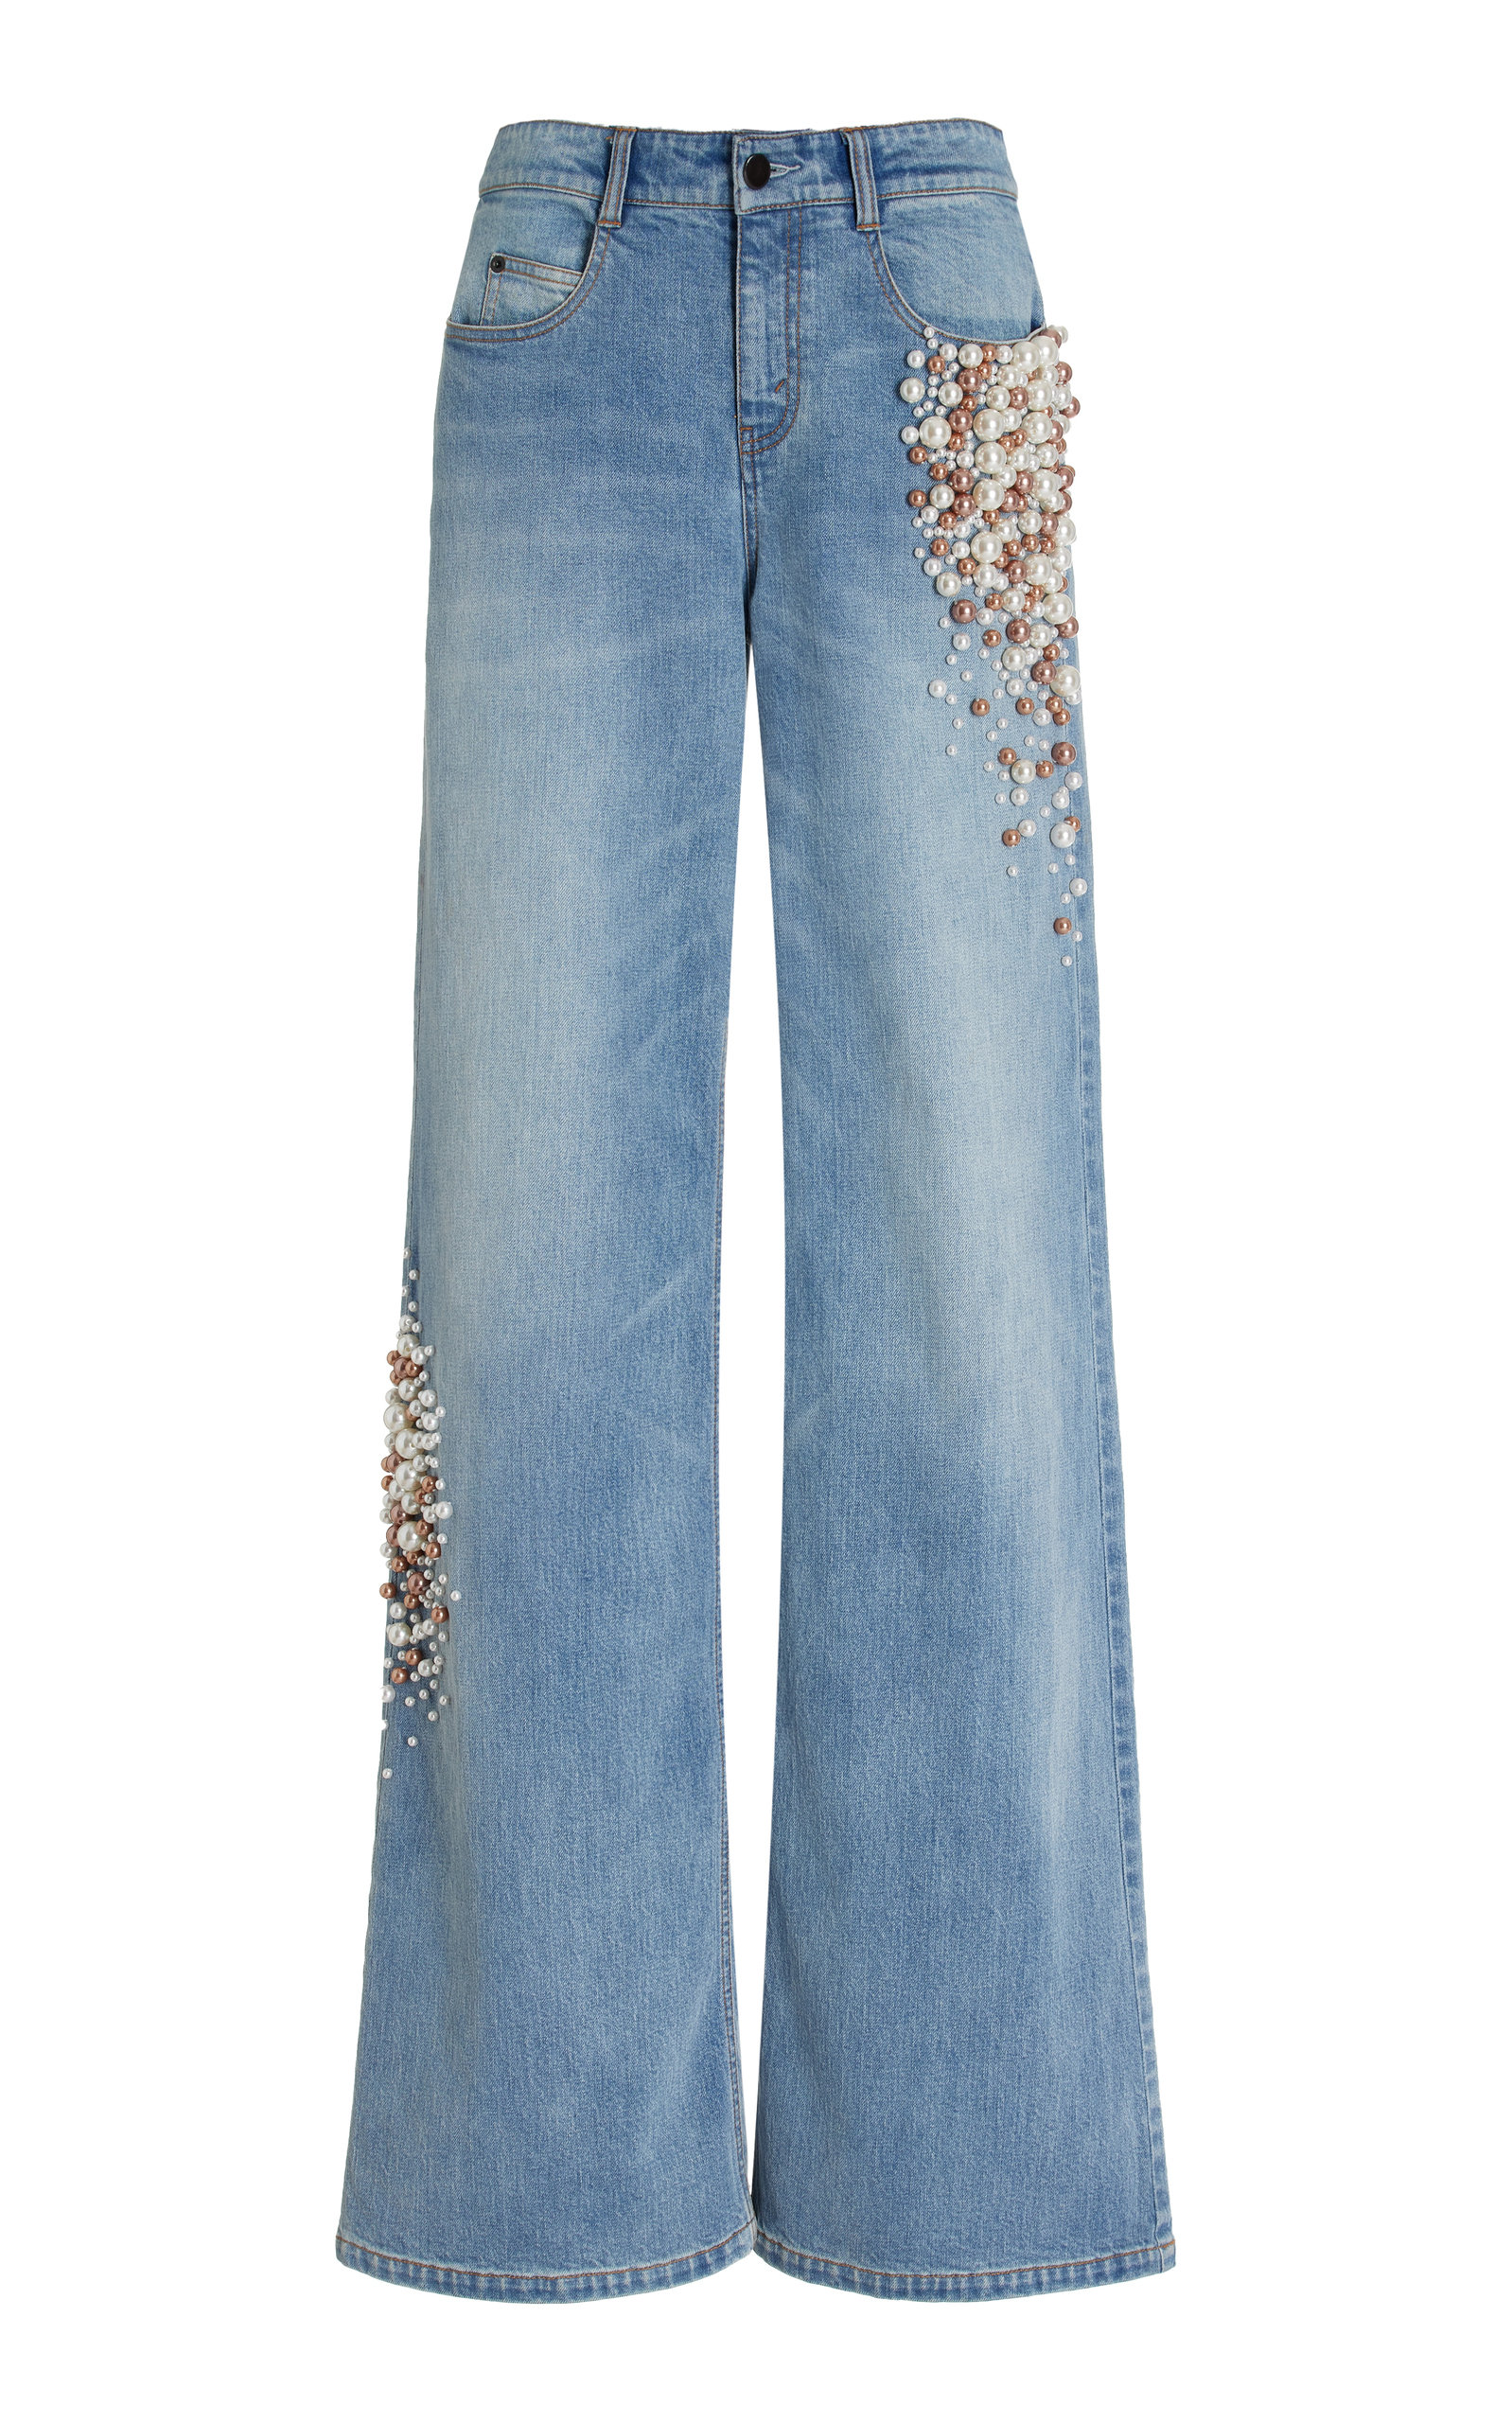 Hellessy Women's Kit pearl embellished stretch cotton Jeans